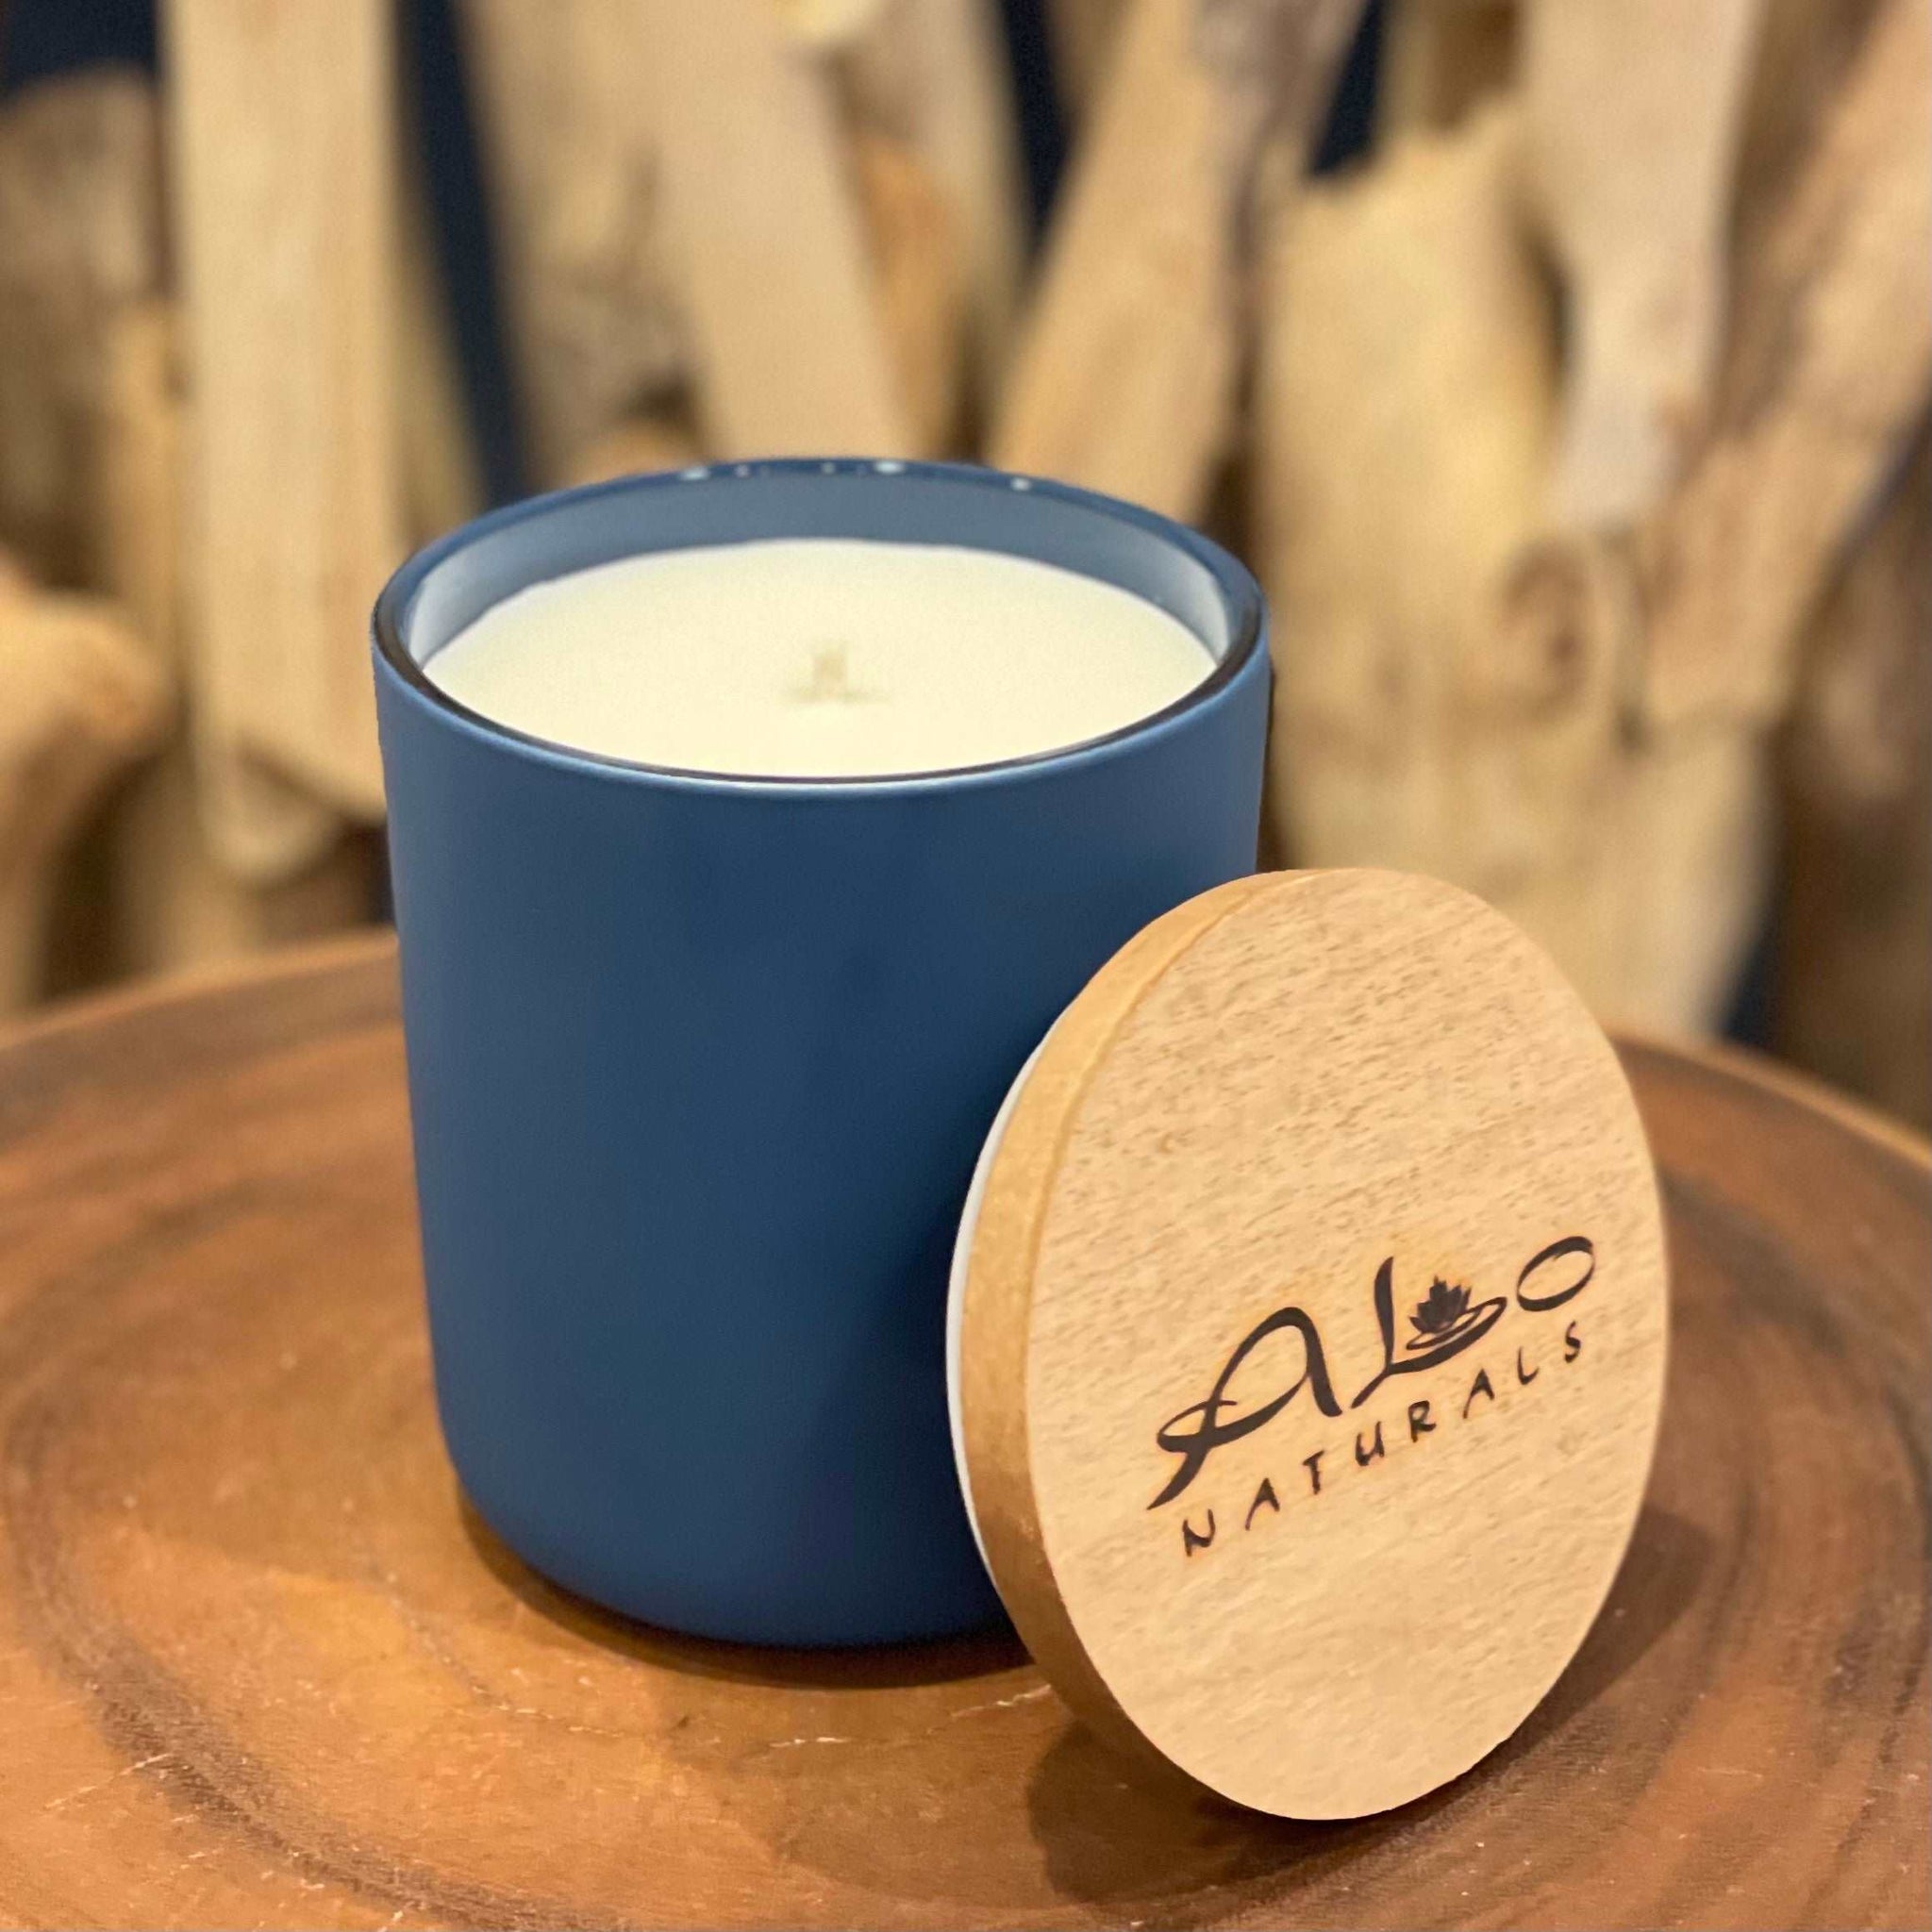 Deep Blue Ocean has the scent of fresh and clean masculinity.  13 ounces of hand poured soy wax in a navy blue frosted glass vessel with a cotton wick and maple wood lid.  Enjoy over 75 hours of burn time!